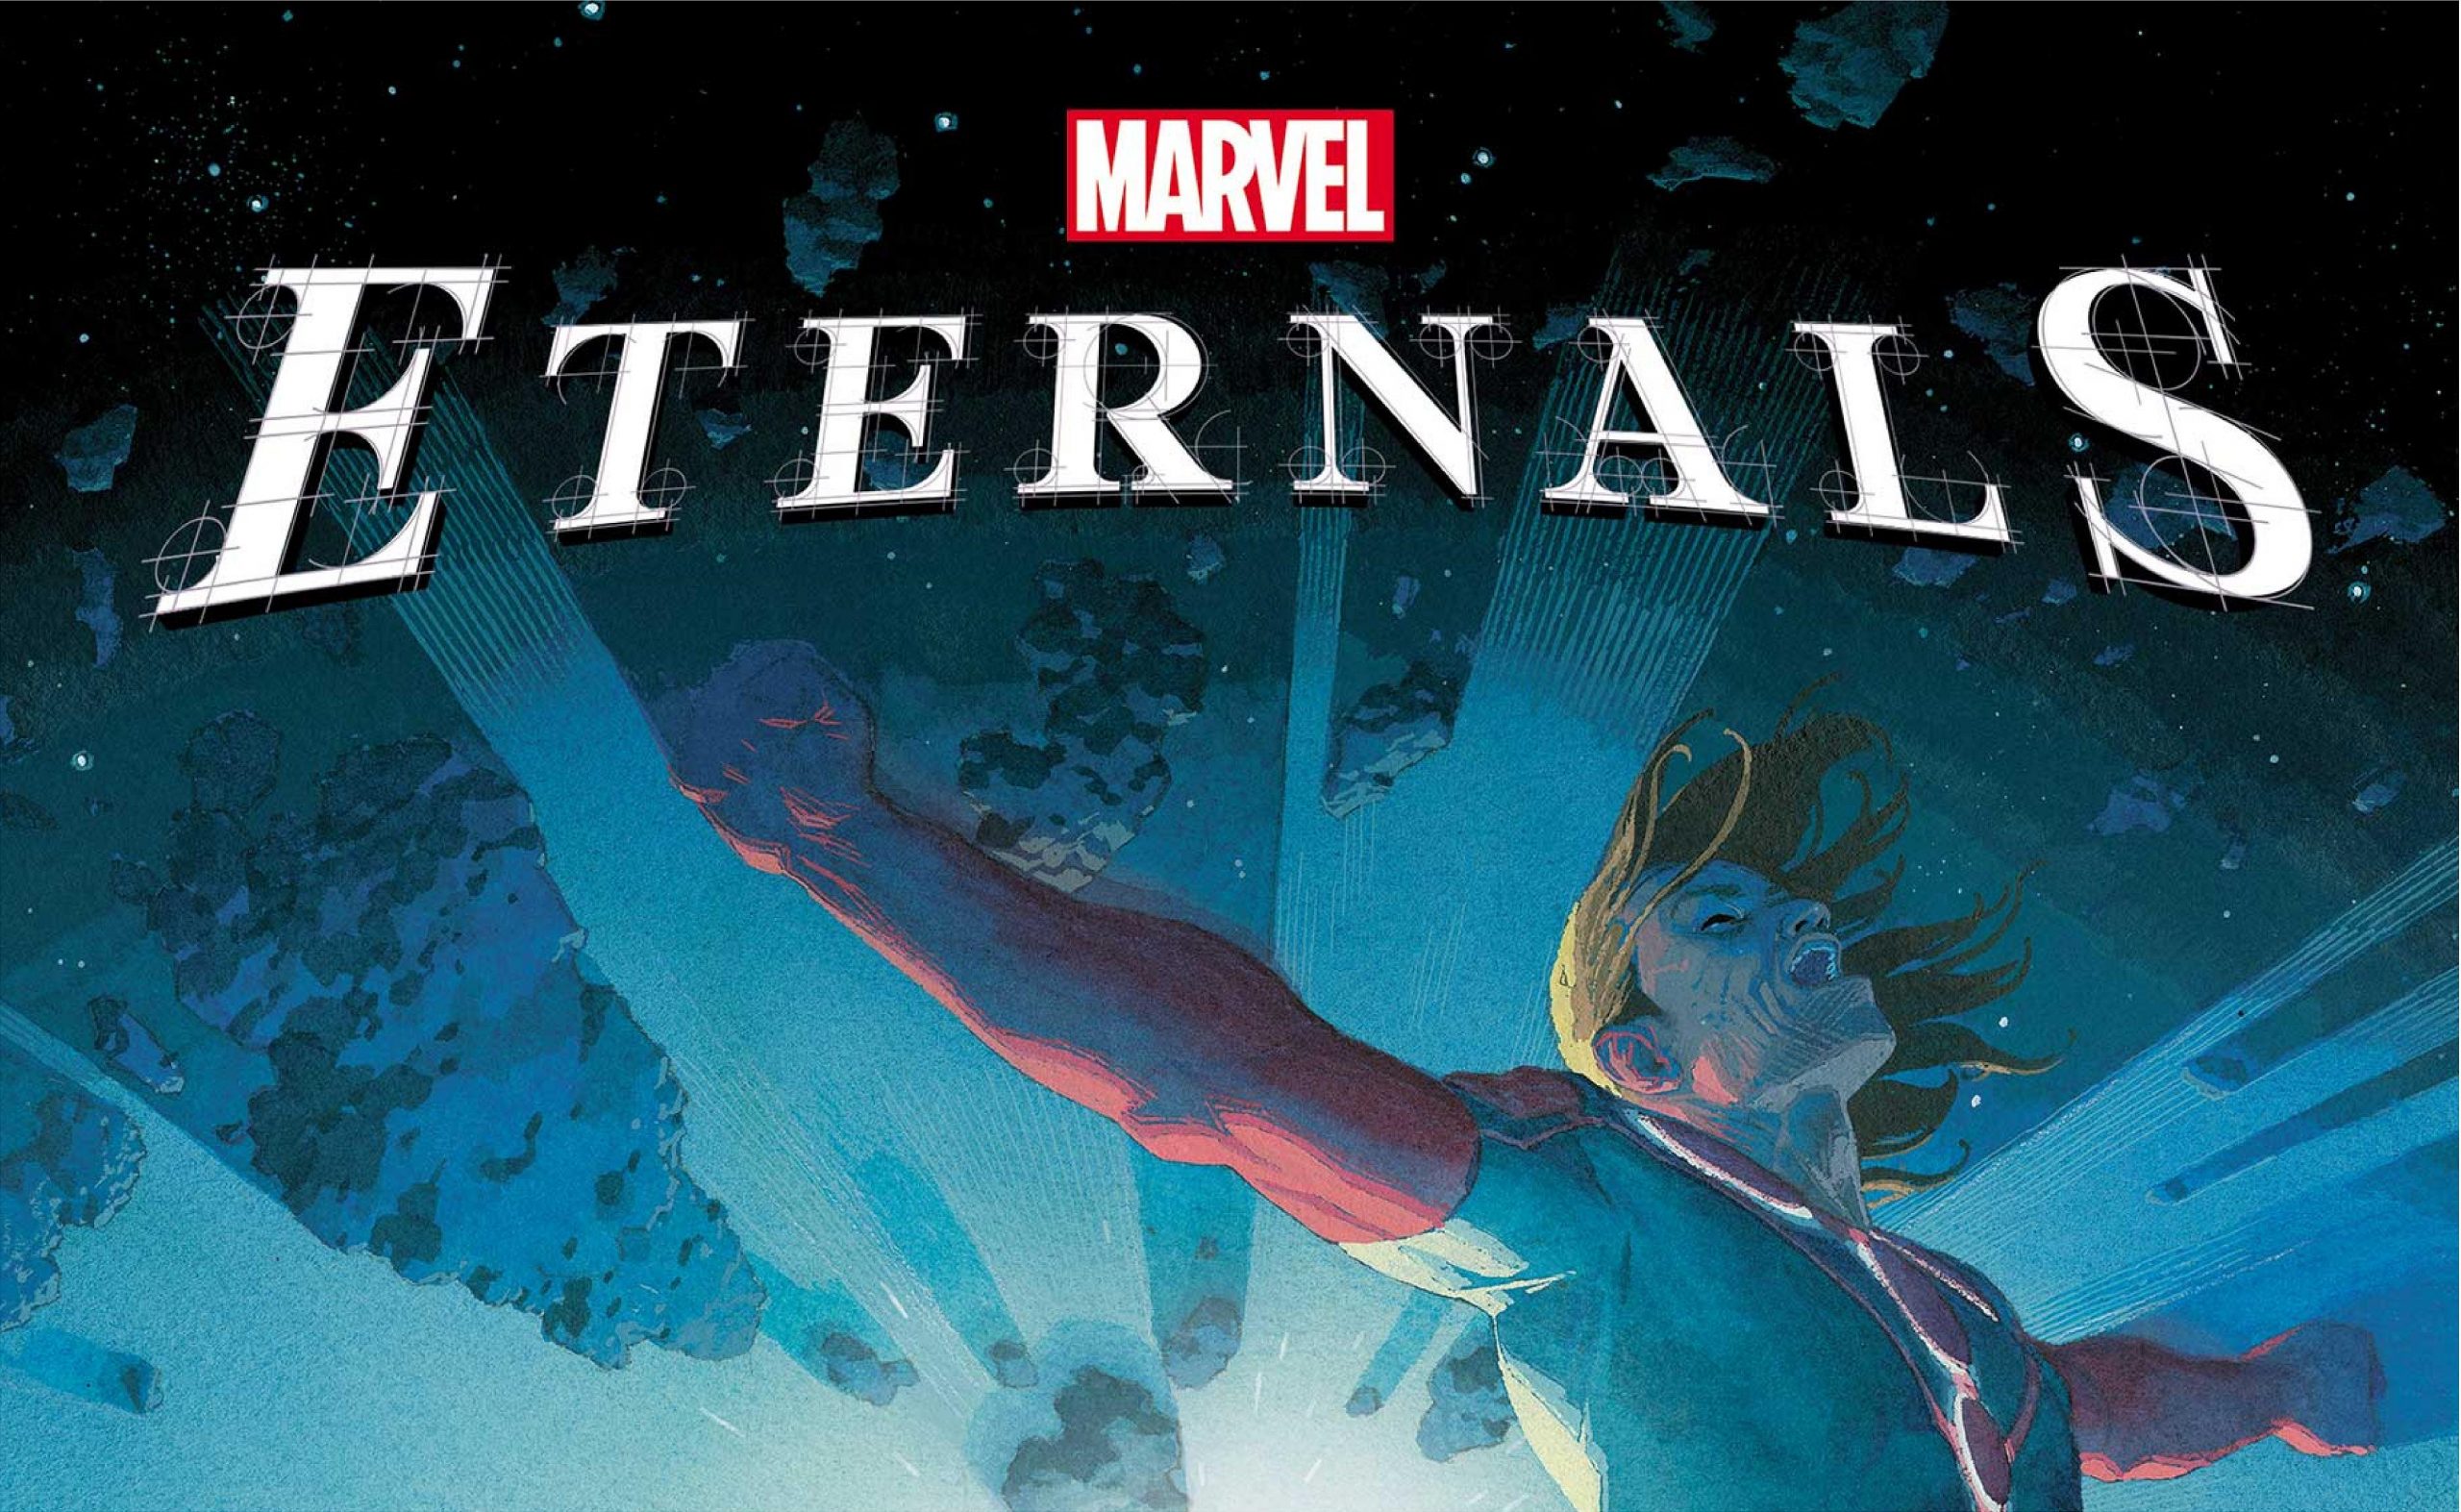 Marvel Gets Us Ready For The Eternals Film With A New Comic Series